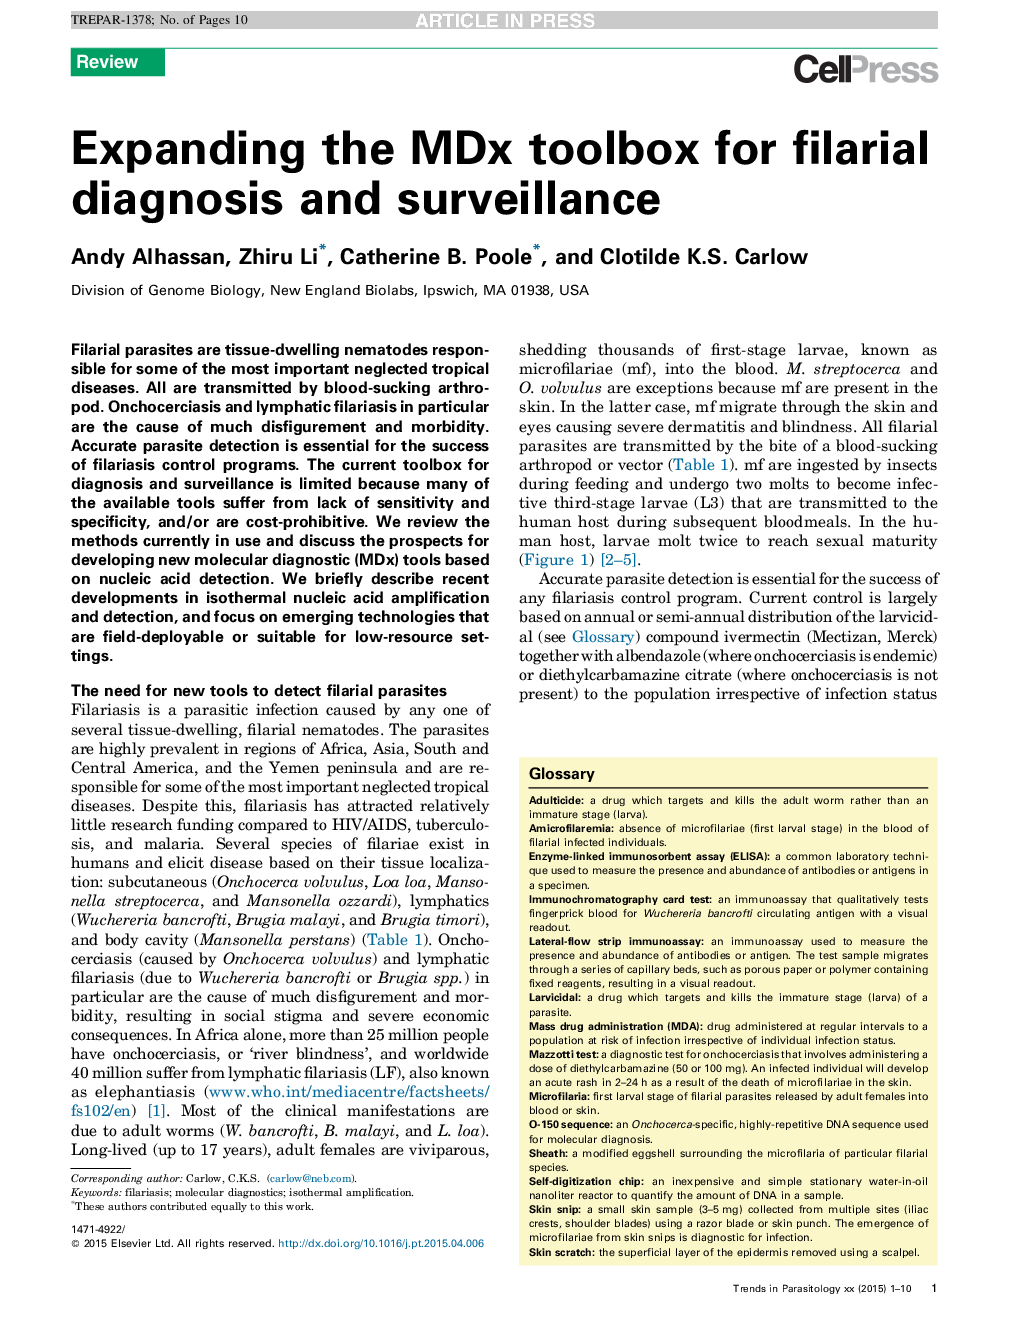 Expanding the MDx toolbox for filarial diagnosis and surveillance